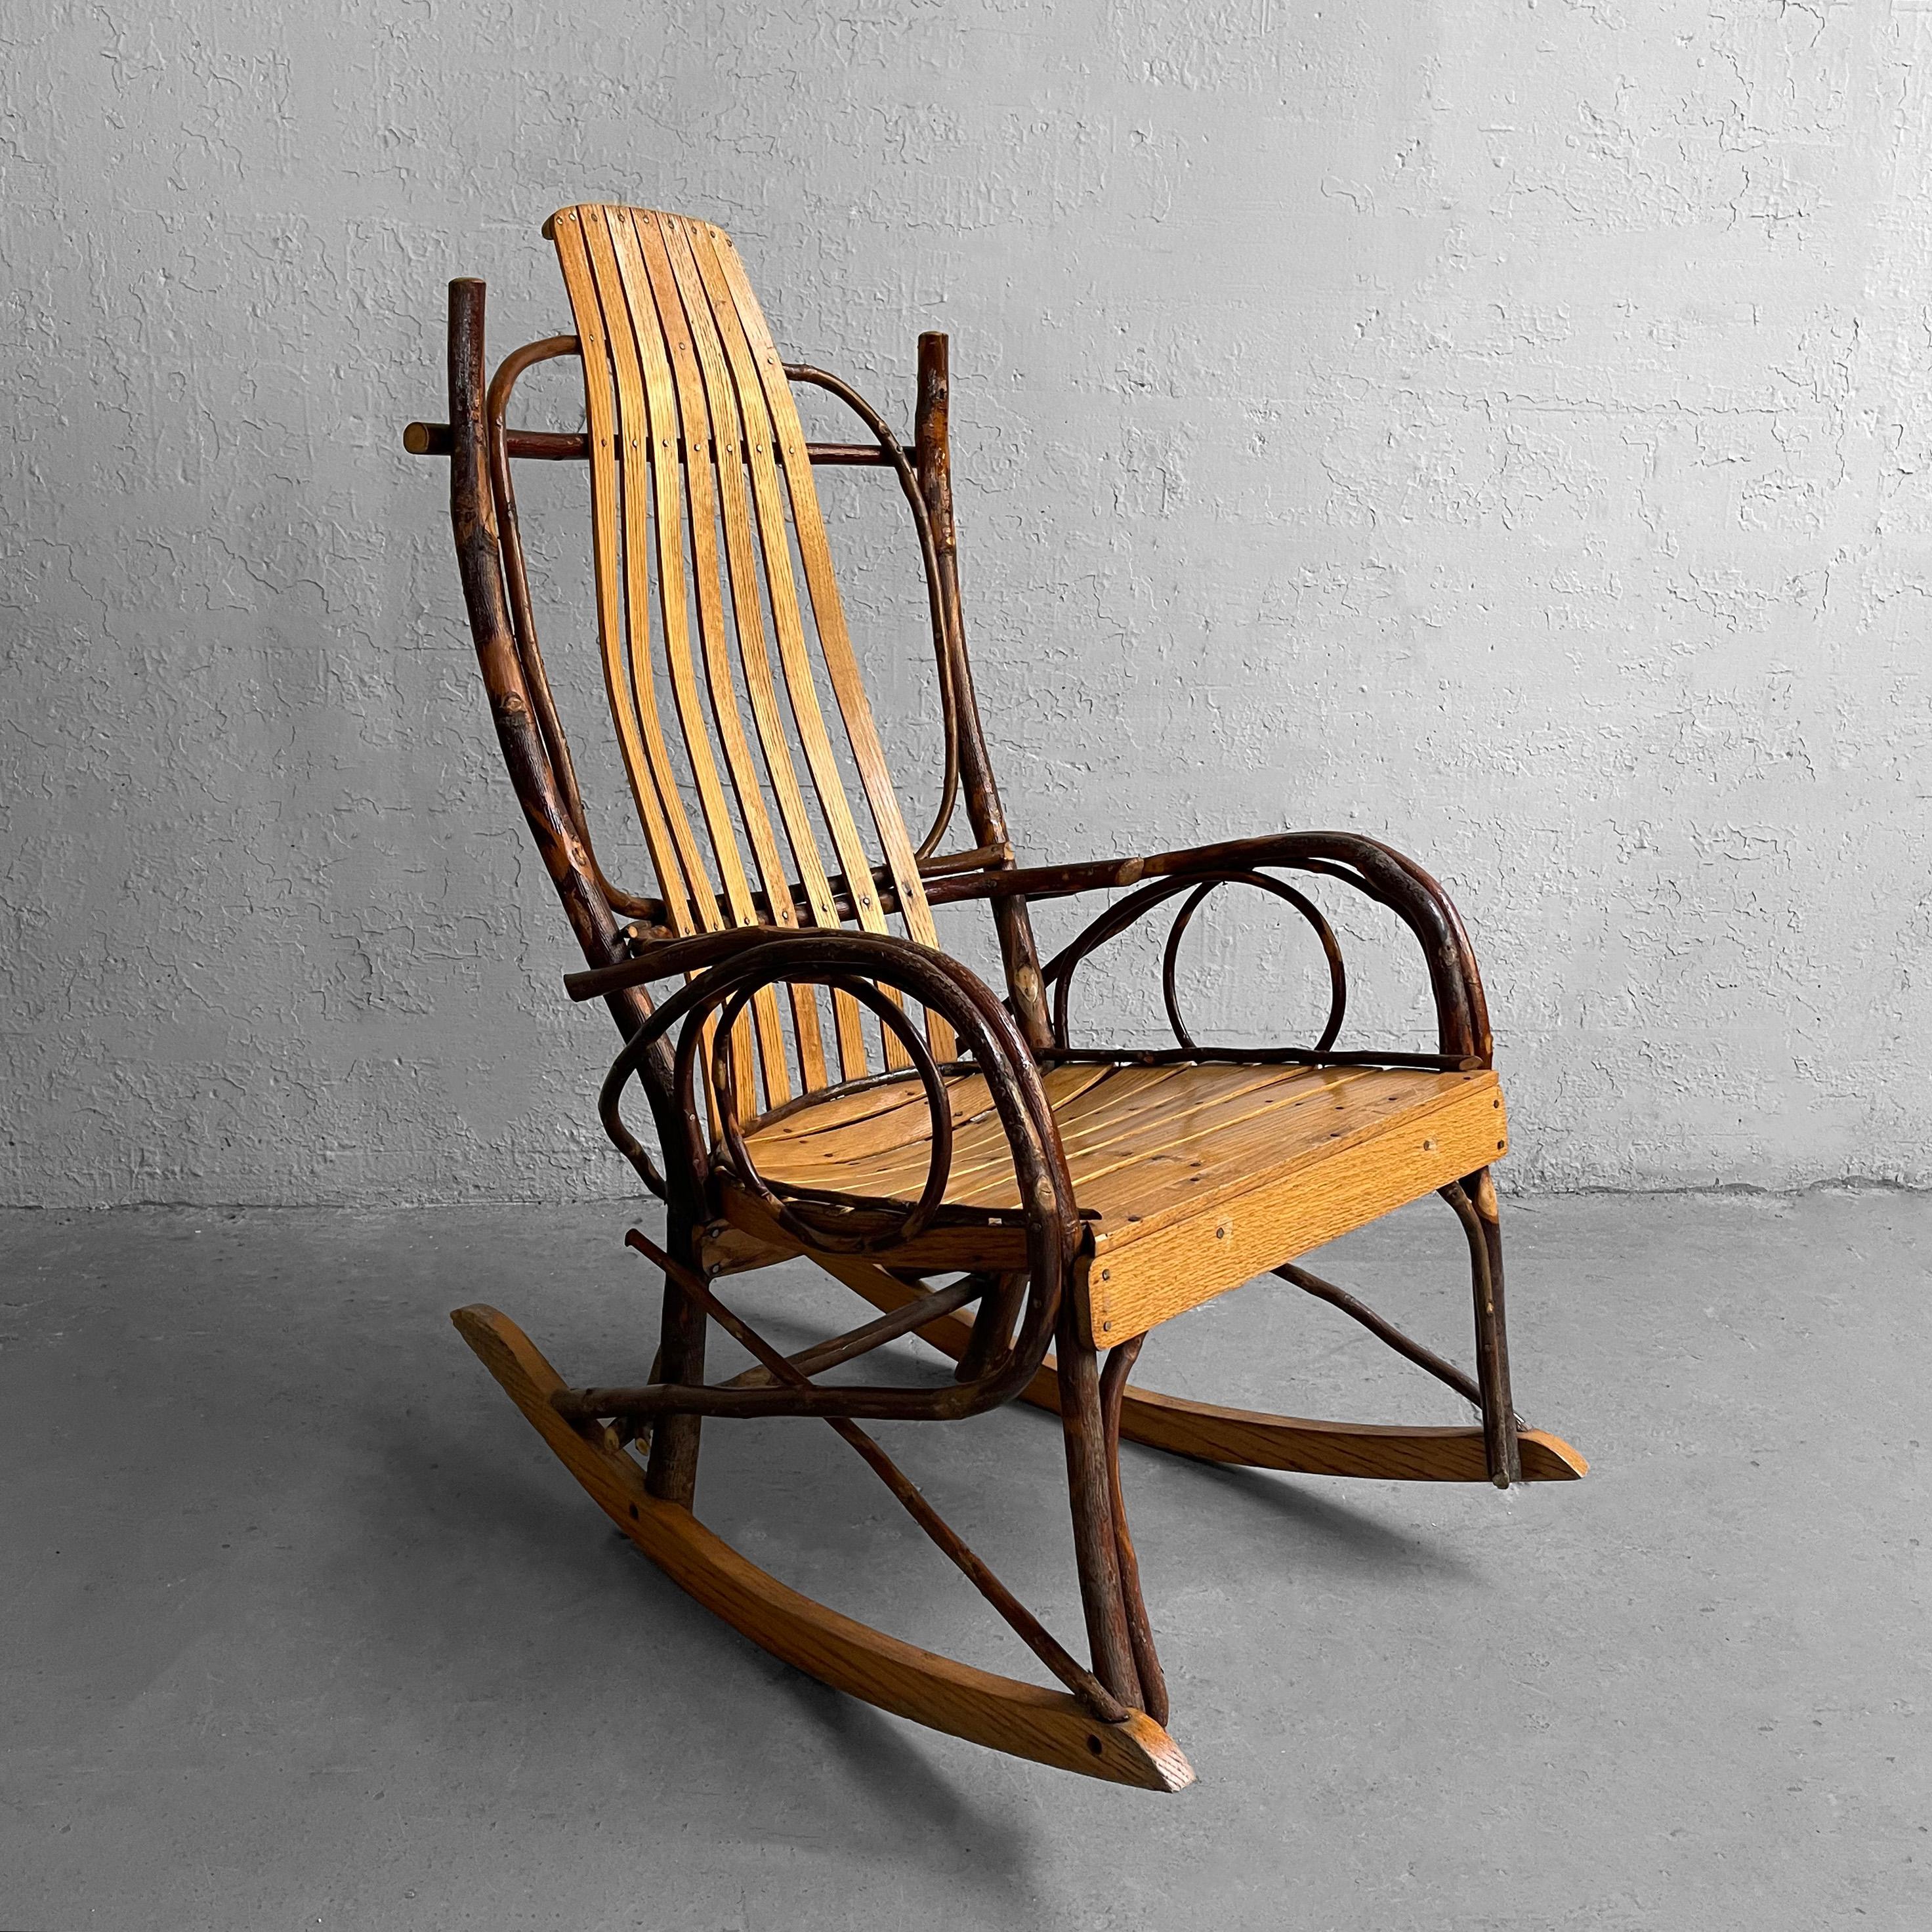 Primitive, Adirondack, craftsman rocking chair features a rustic twig frame with contoured, slat, cherry bentwood seat and high back. Comfy and homey, perfect for a rustic, country decor and can be used on a covered porch. Arm height is 22 inches.